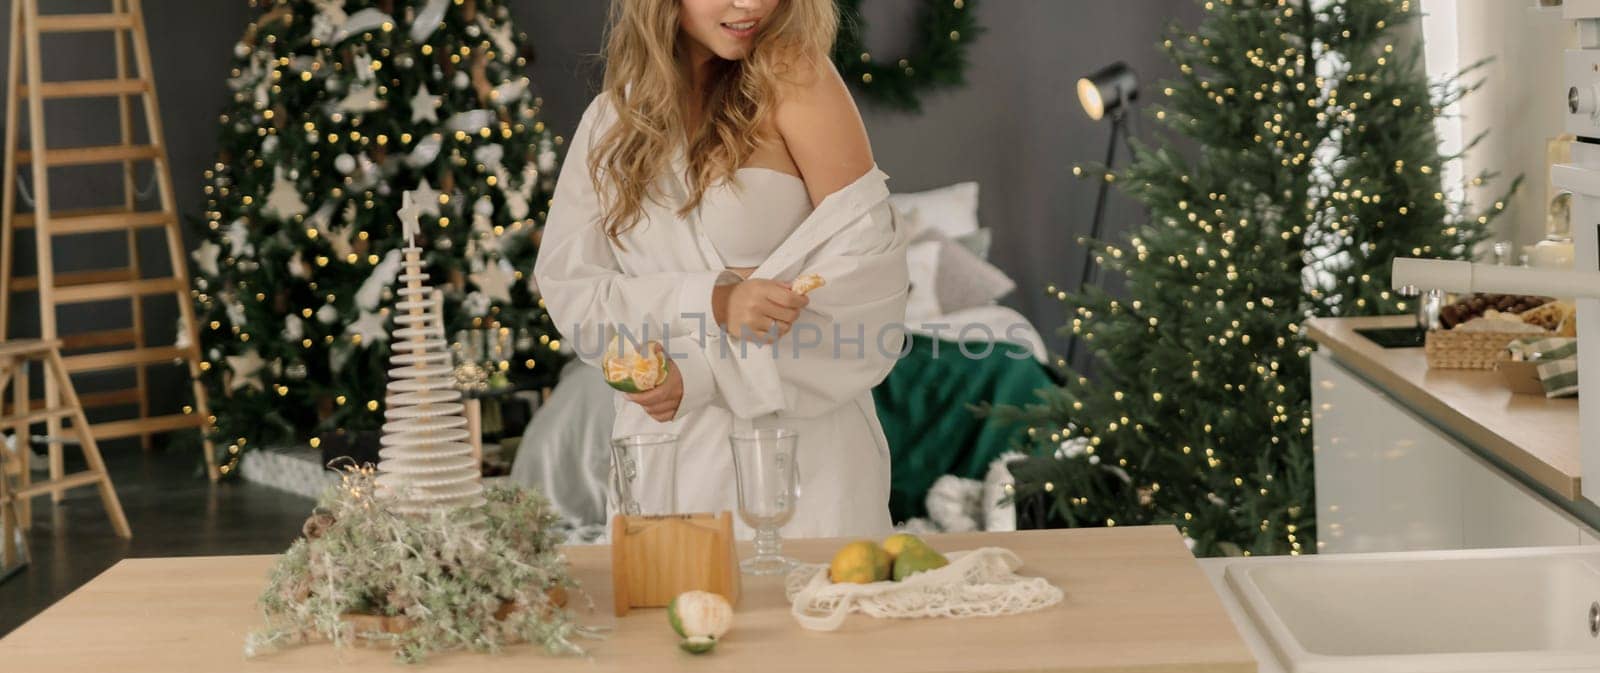 Woman Kitchen Christmas decor in white shirt, peeling tangerines. Illustrating New Year's mood holiday preparations.